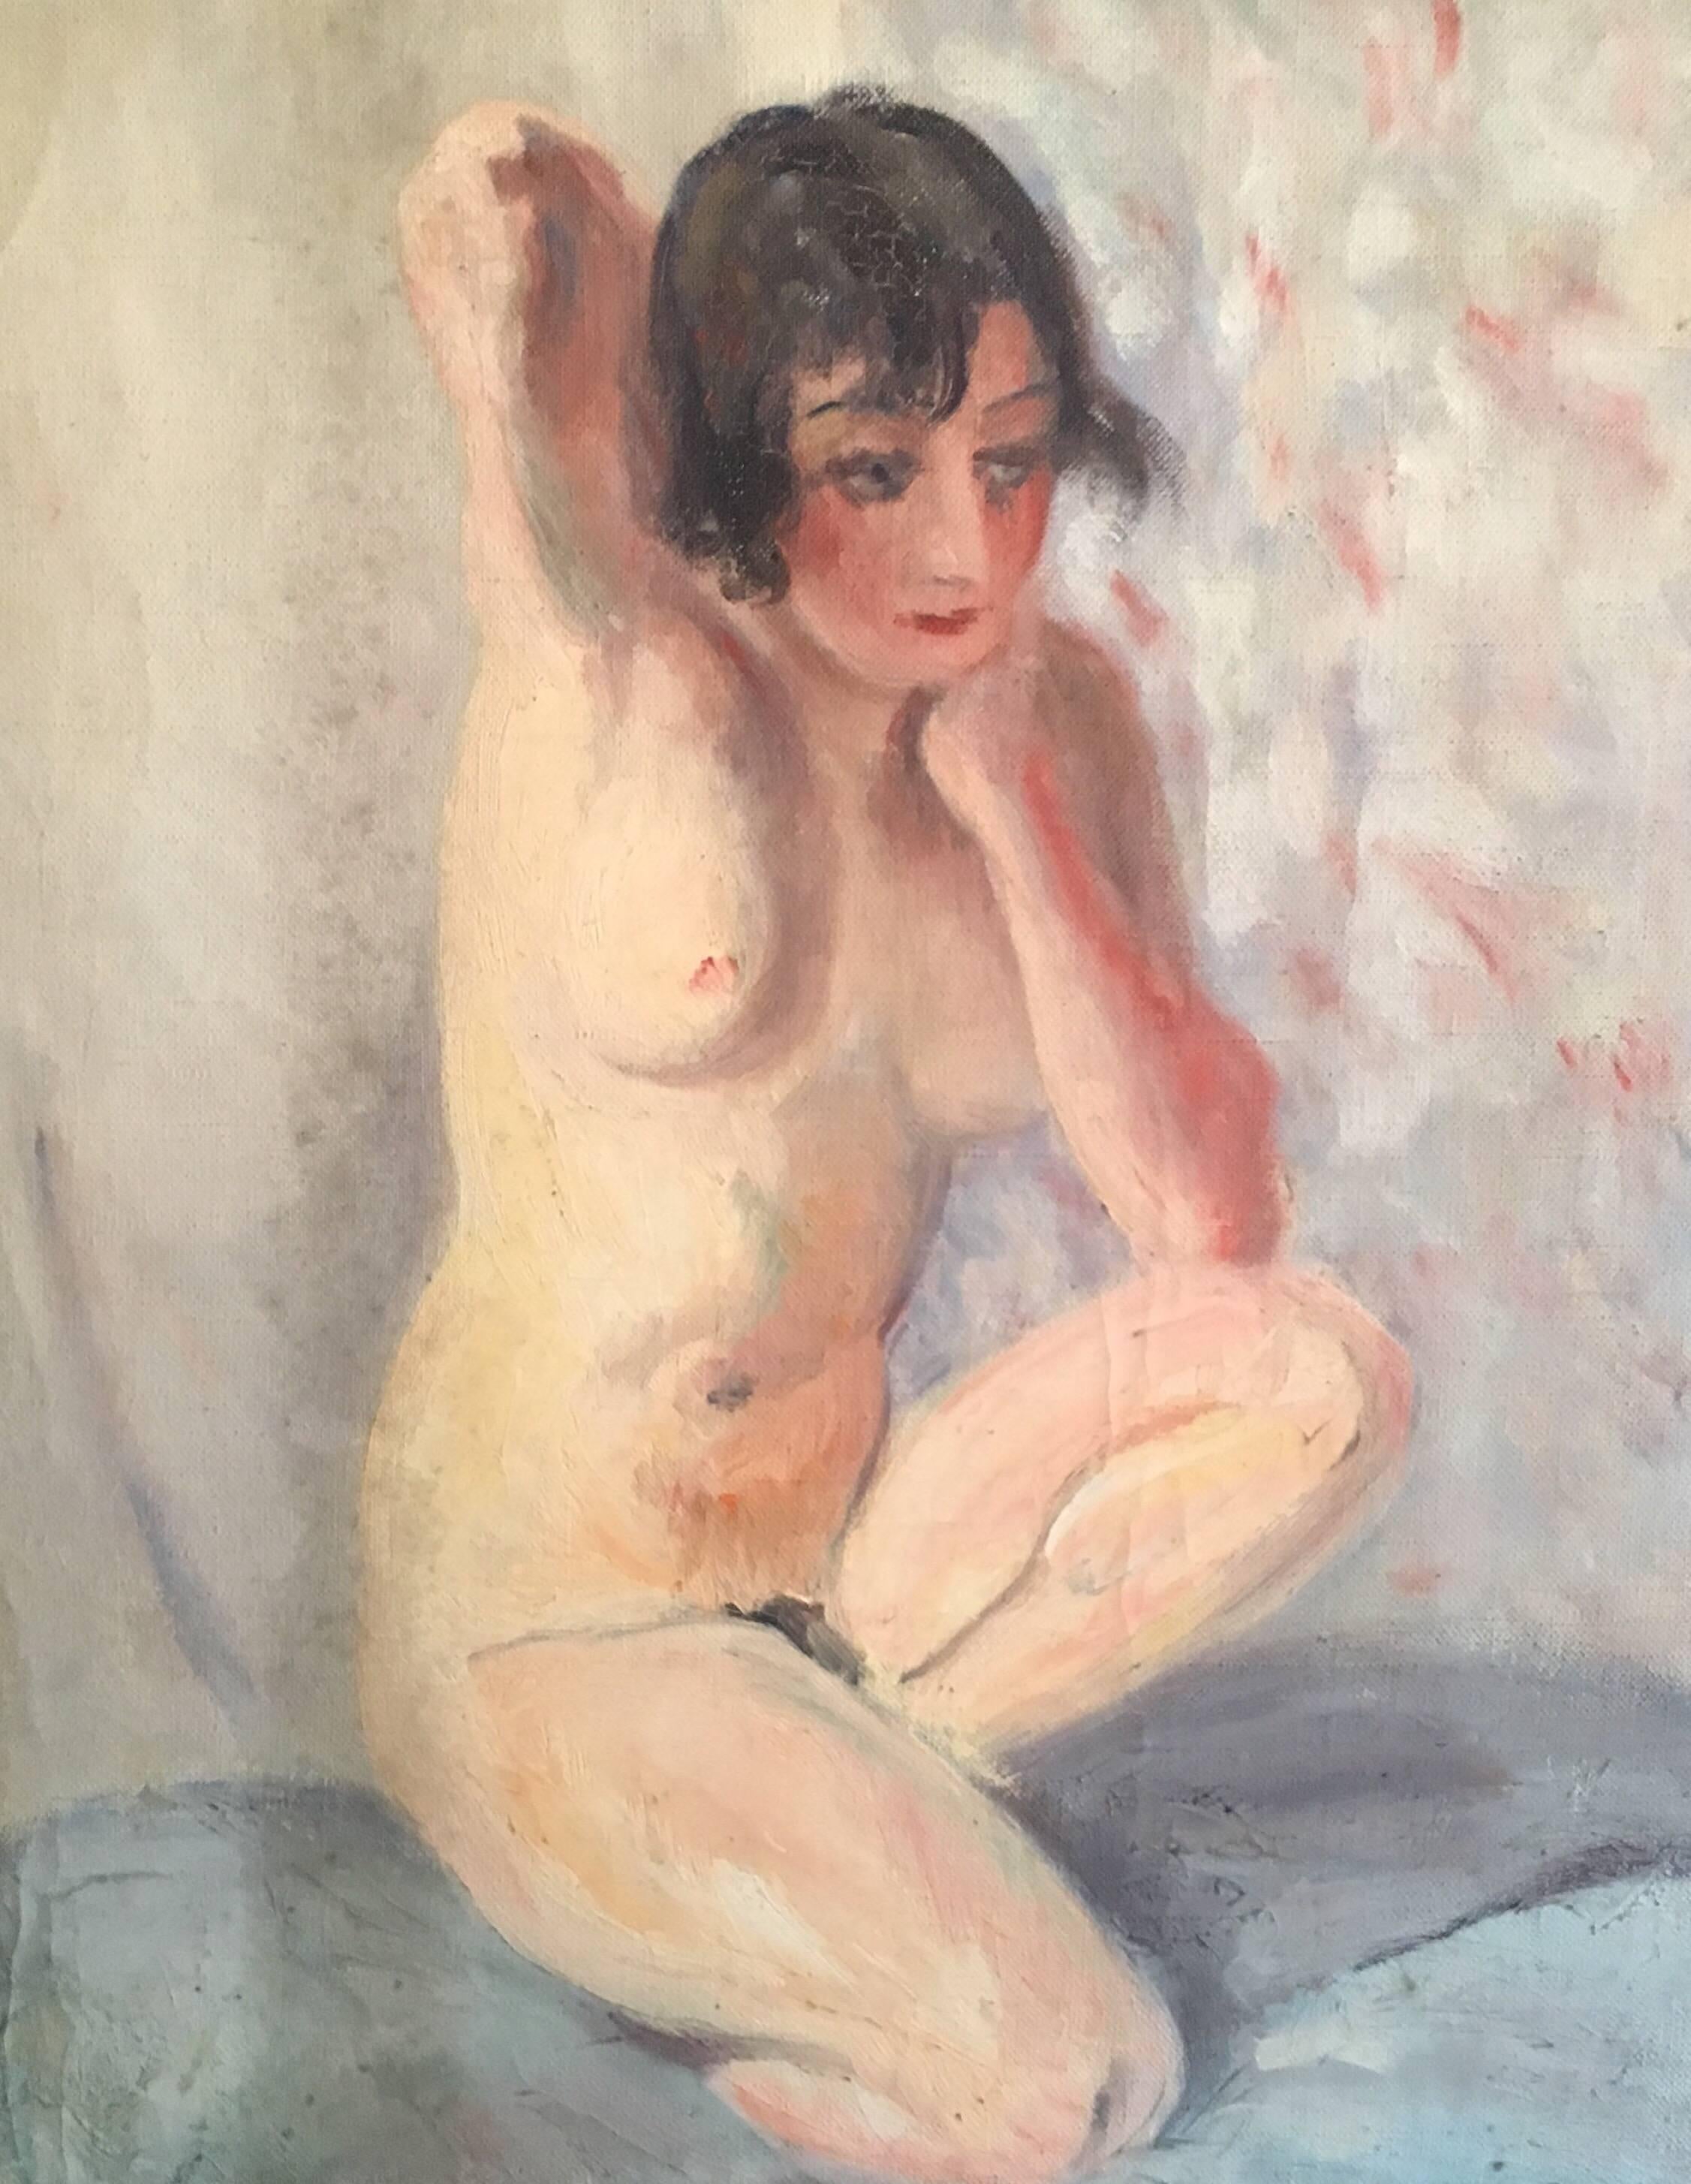 Unknown Portrait Painting - The Nude Model, French Impressionist 1930’s Oil Painting 